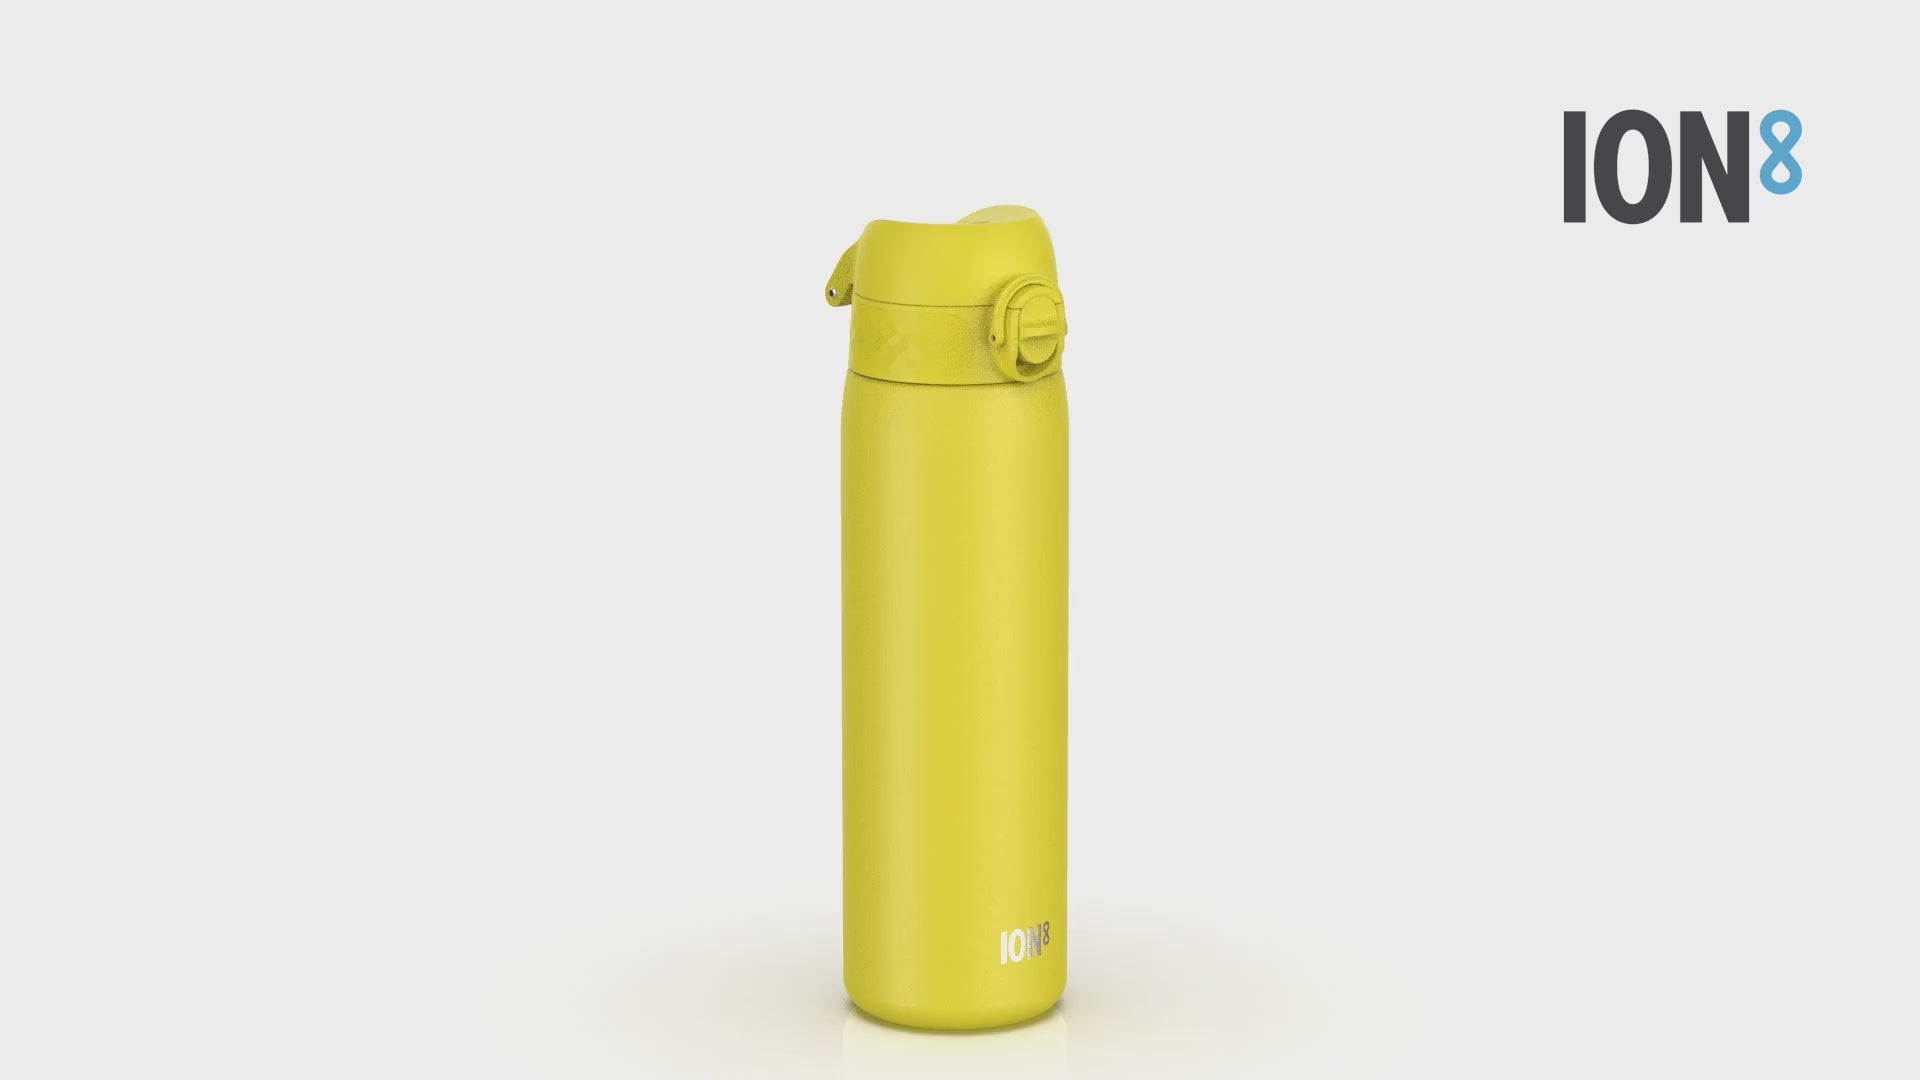 360 video view of Ion8 Leak Proof Slim Water Bottle, Vacuum Insulated Stainless Steel, Yellow, 500ml (17oz)